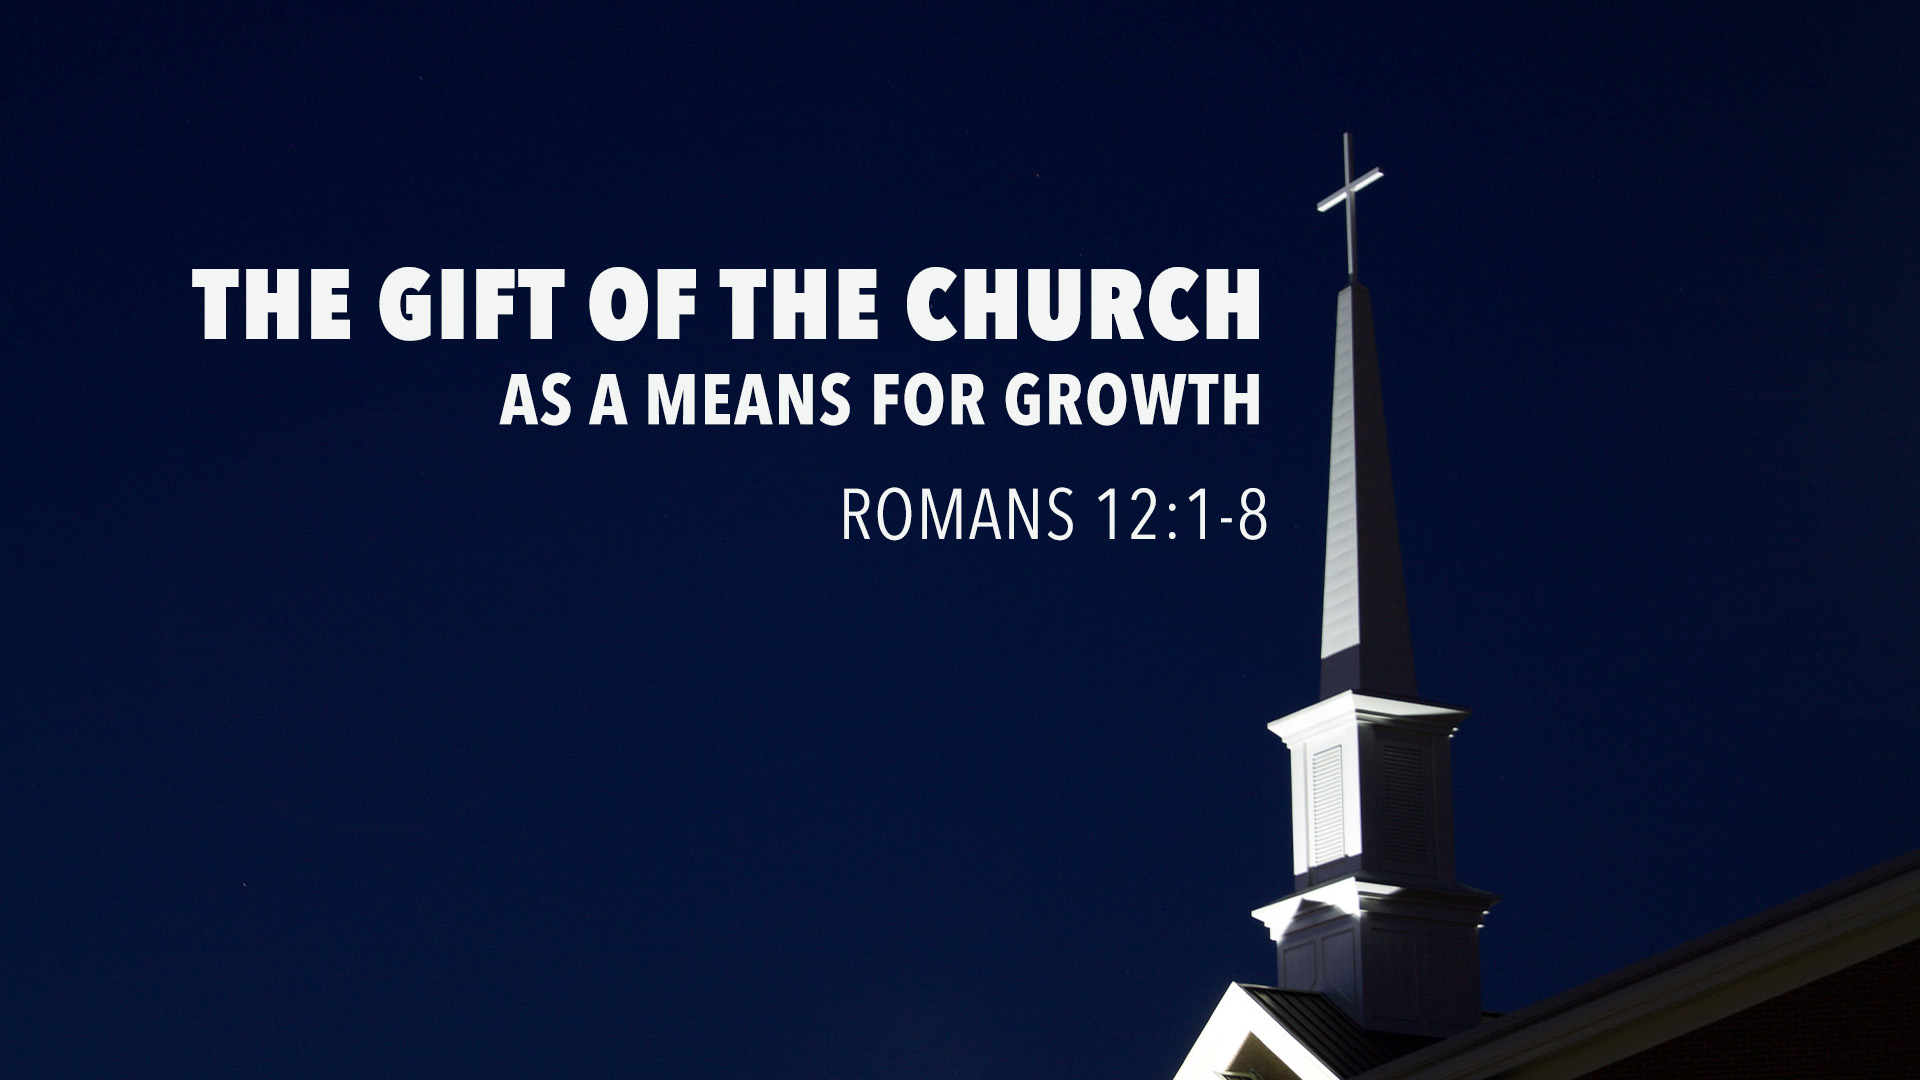 The Gift of the Church as a Means for Growth Image